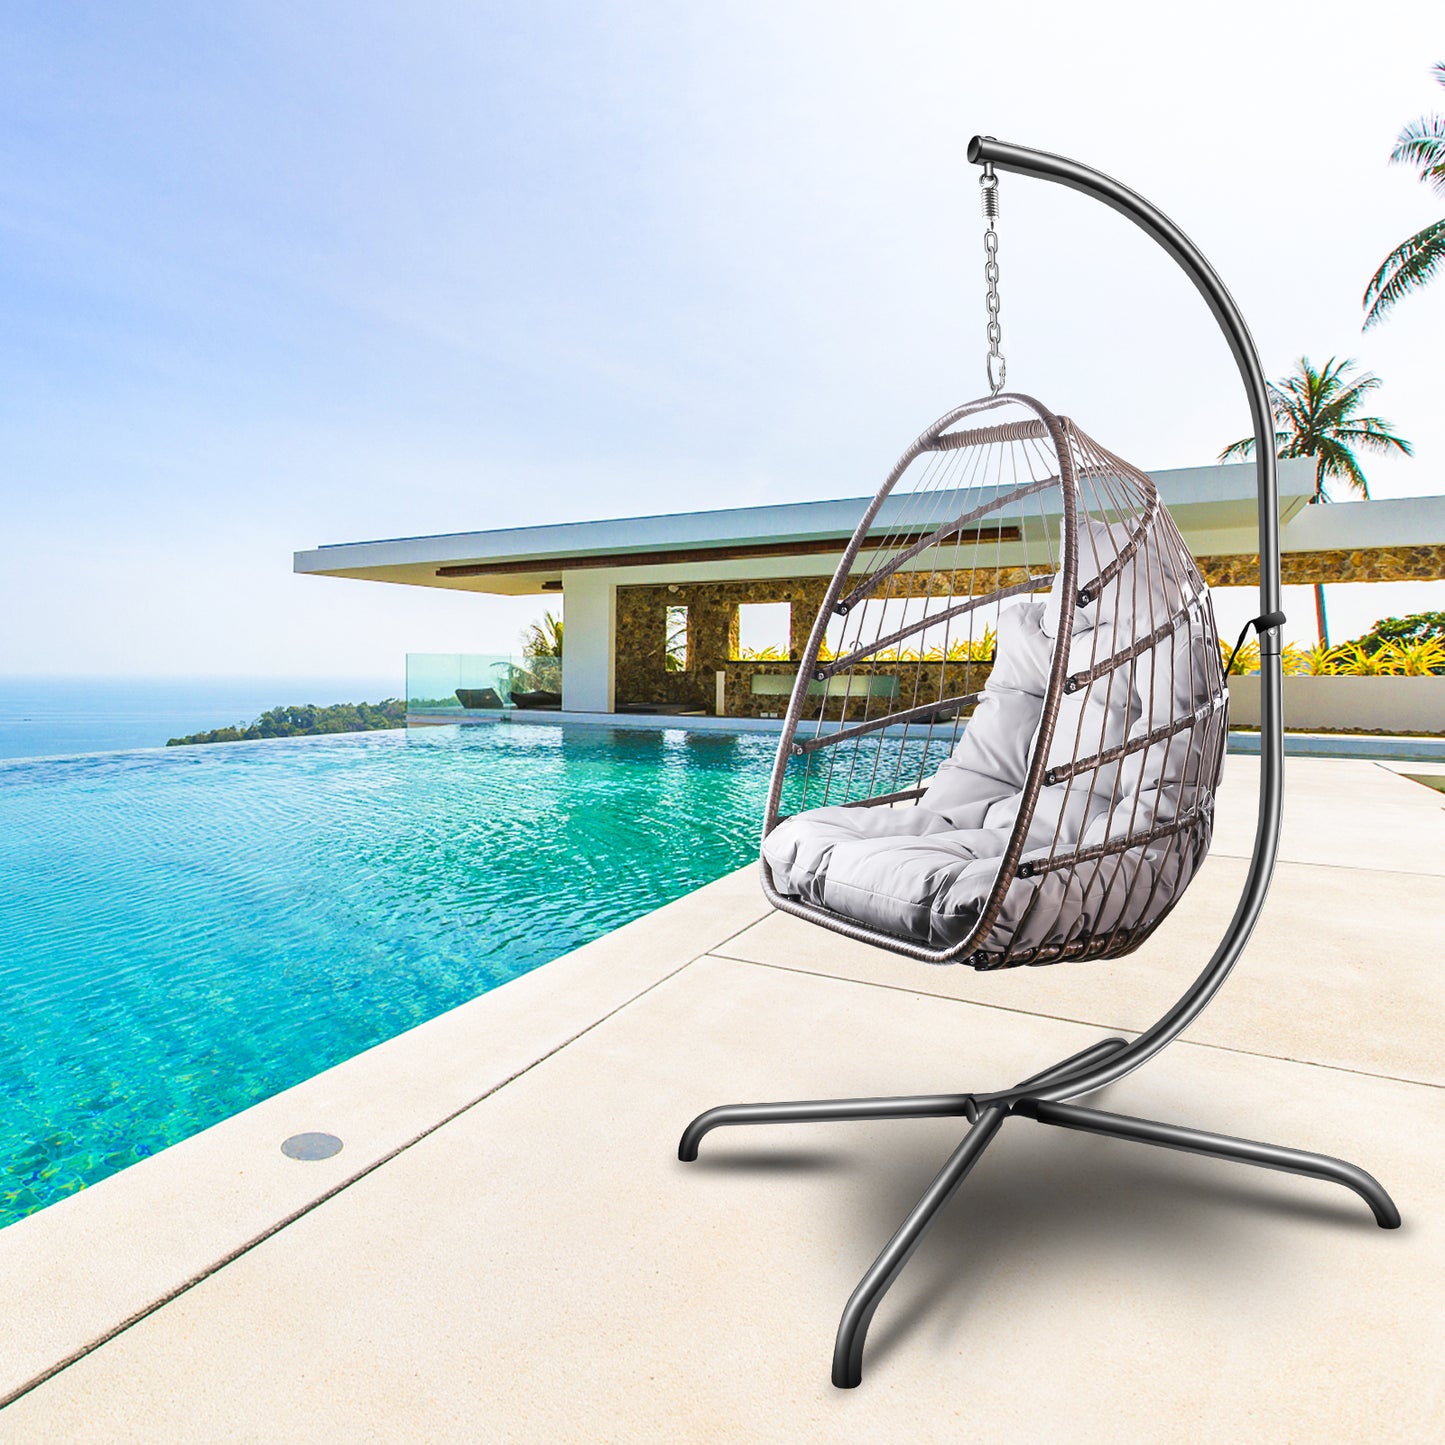 SYNGAR Egg Chair with Stand, Wicker Swing Chair, Patio Hammock Chair with Soft Cushion, Indoor Outdoor Balcony Bedroom Basket Hanging Lounge Chair, Heavy Duty Frame for 350 lbs Capacity, C27